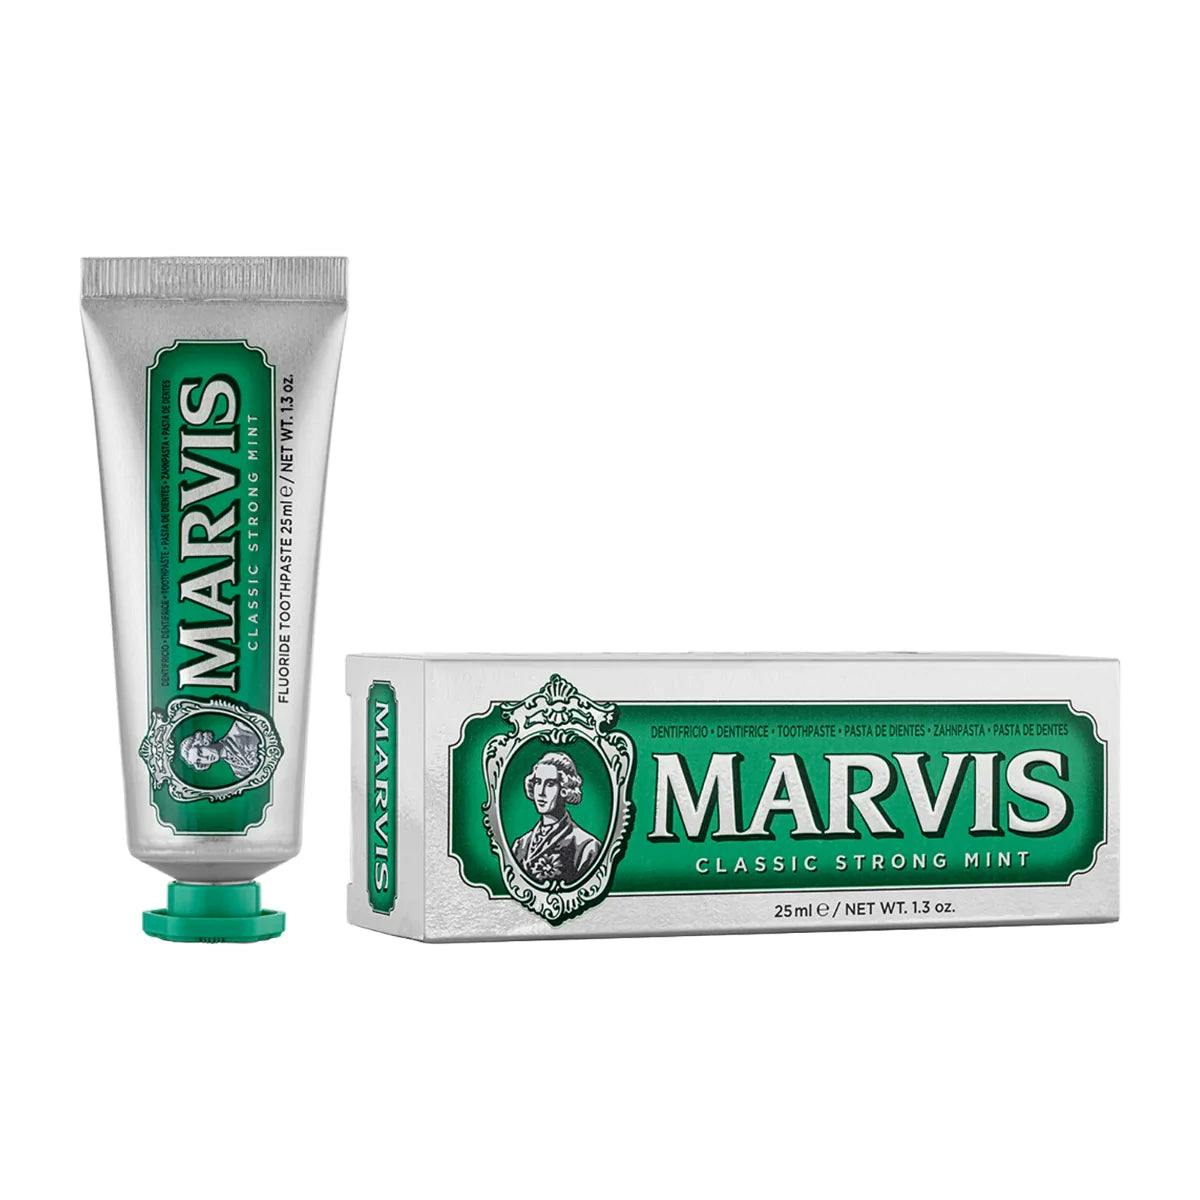 Marvis Travel Size Classic Mint Toothpaste 25ml